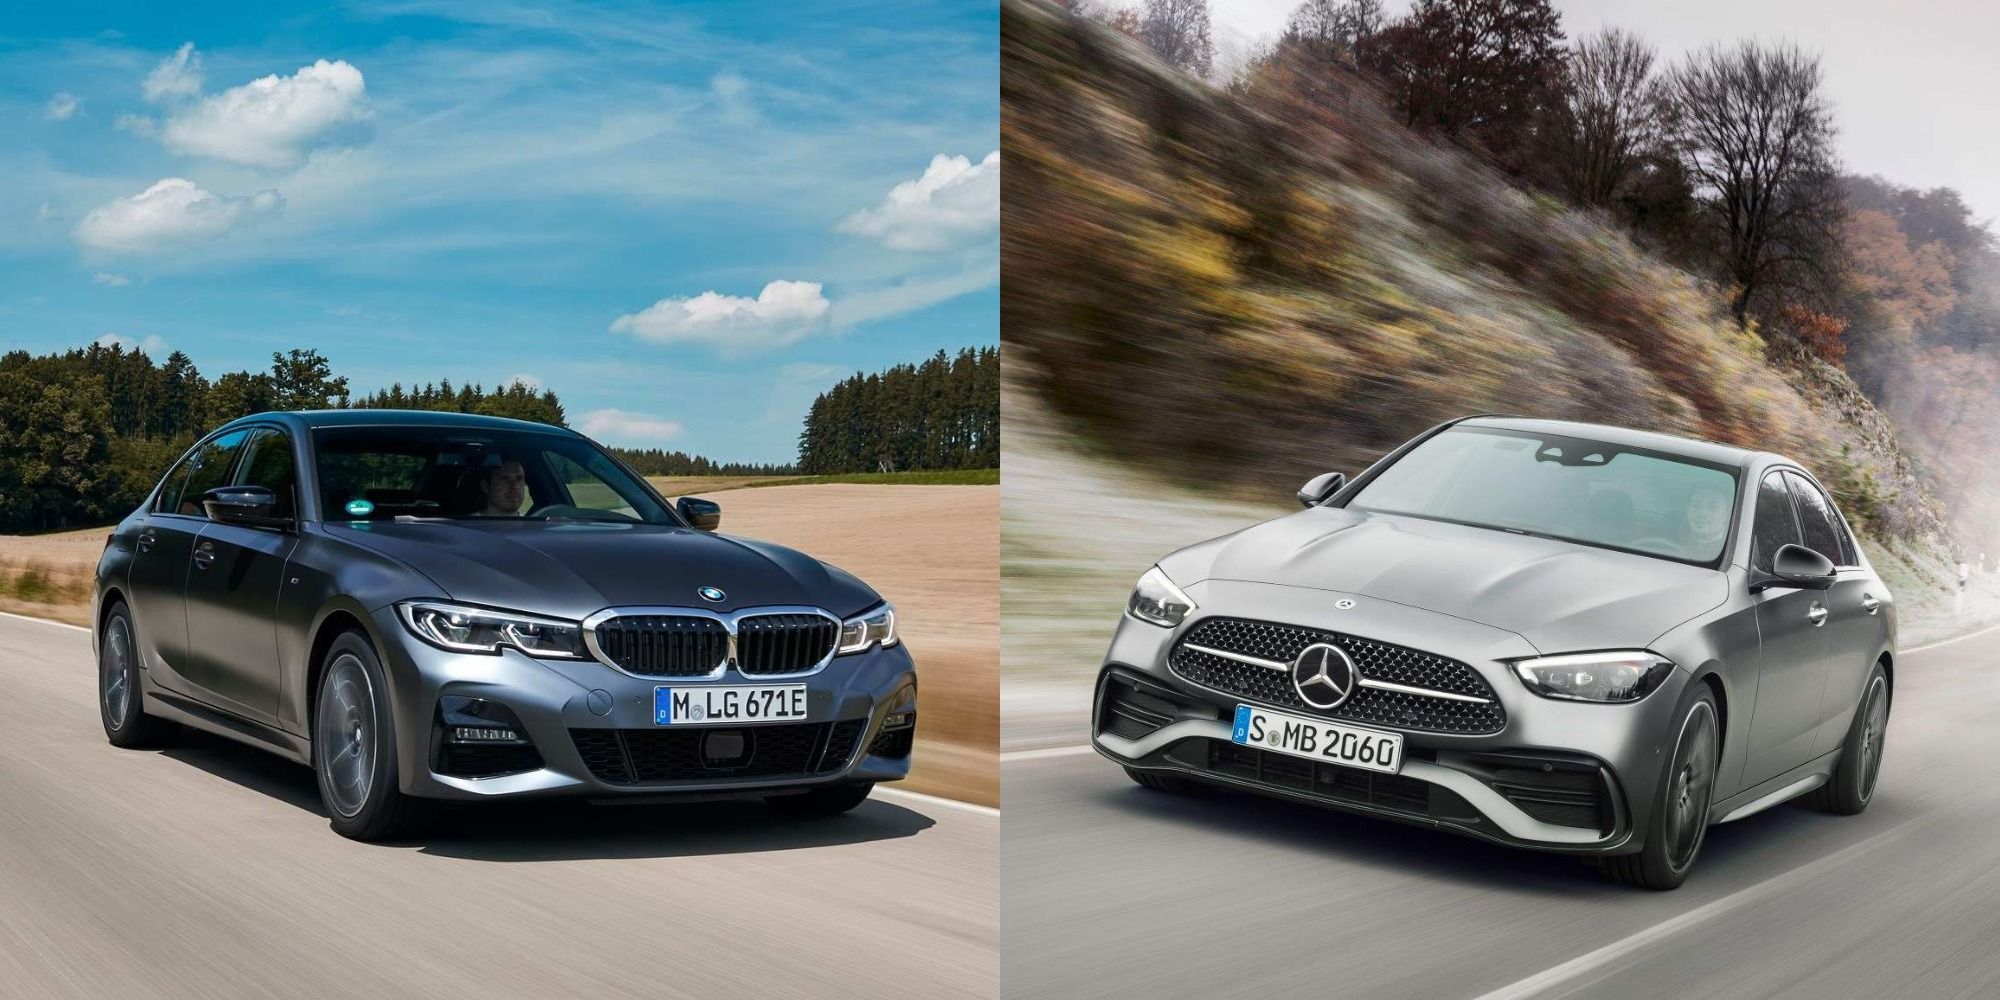 BMW 3 Series Vs MercedesBenz CClass Here's Which Sedan Comes Out On Top